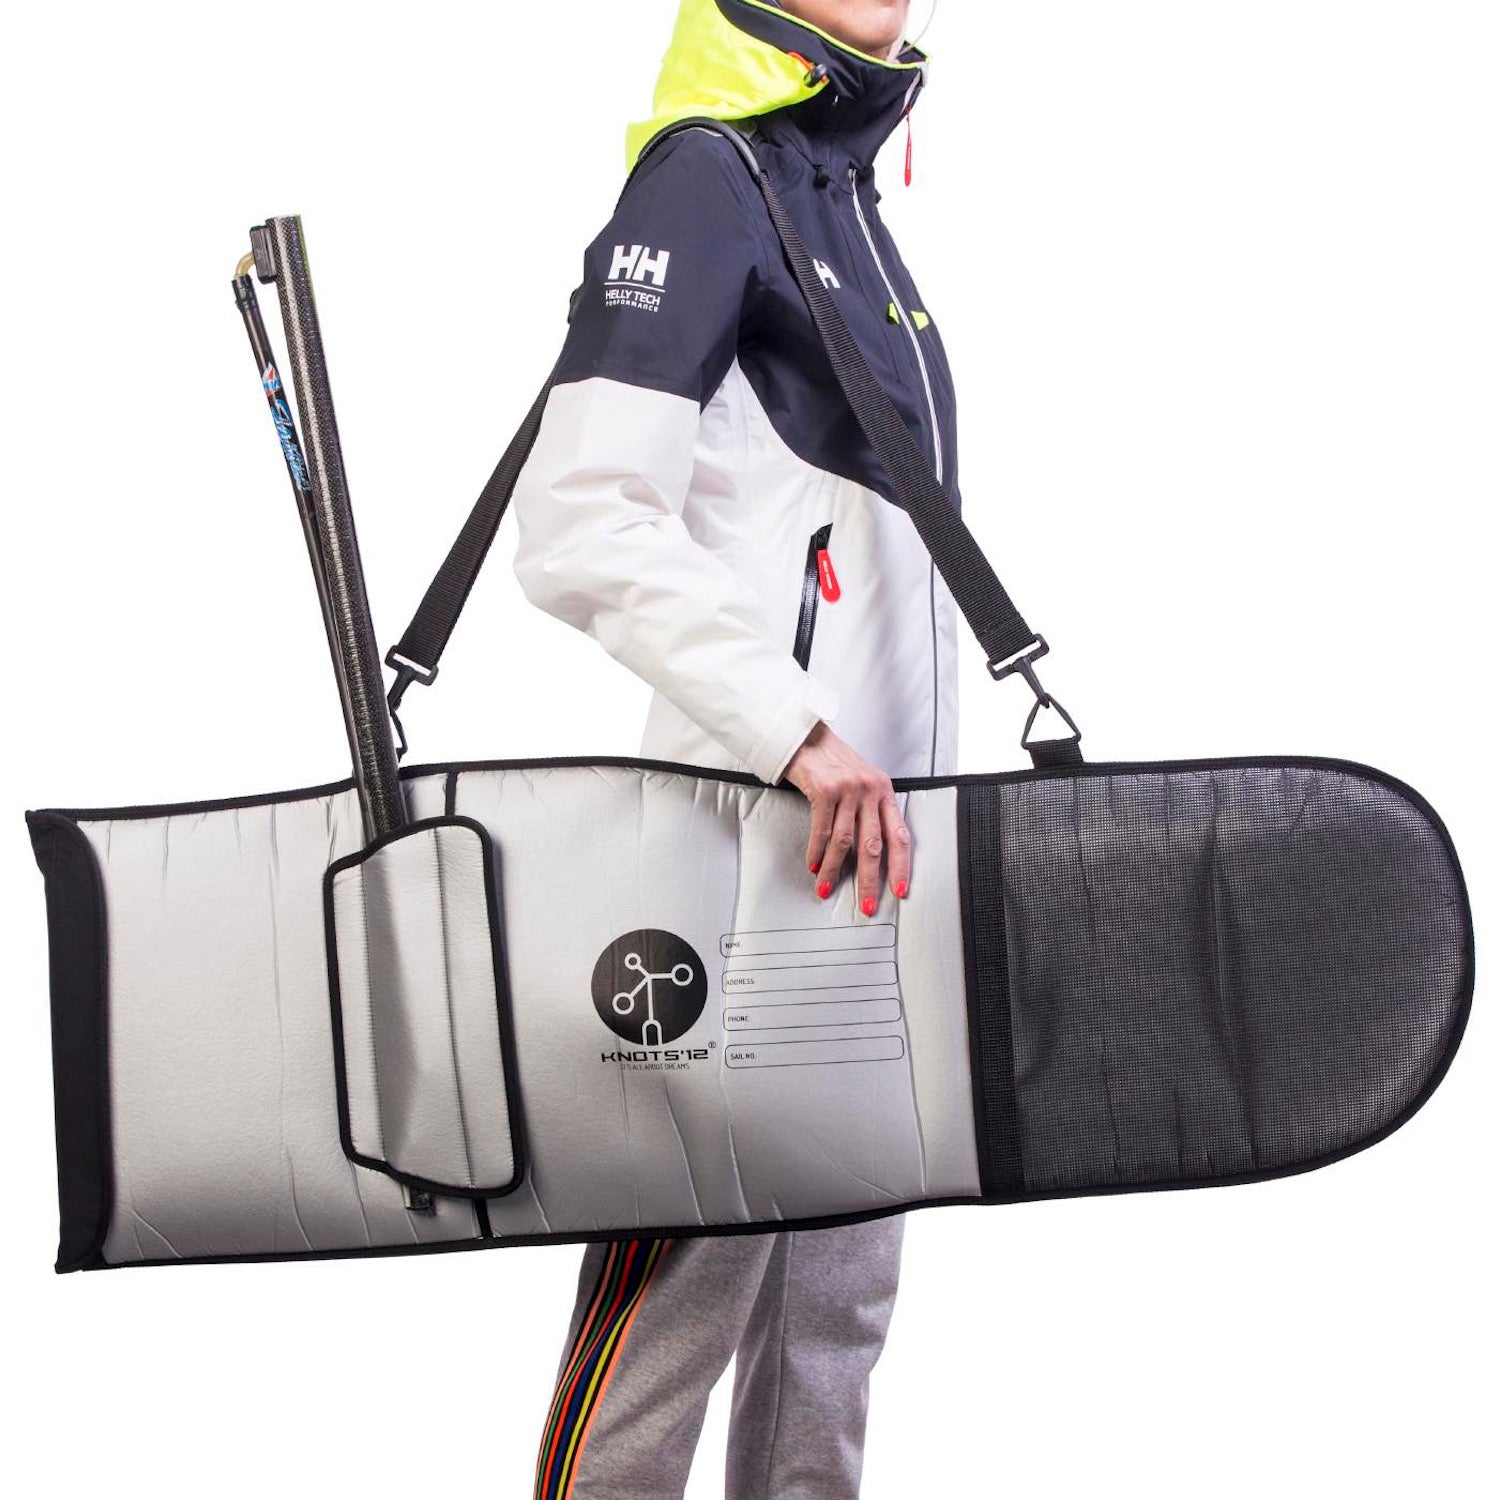 Knots12 Zoom8 centerboard padded cover bag EAN / GTIN code: 4744422010143. The bag is made of high-quality materials, PU600, polyester, and 3mm polyurethane foam. It is water-repellent, while at the same time &quot;breathable&quot;.  The included name tag is easily filled out by the owner. Knots12 products blend . Real size.